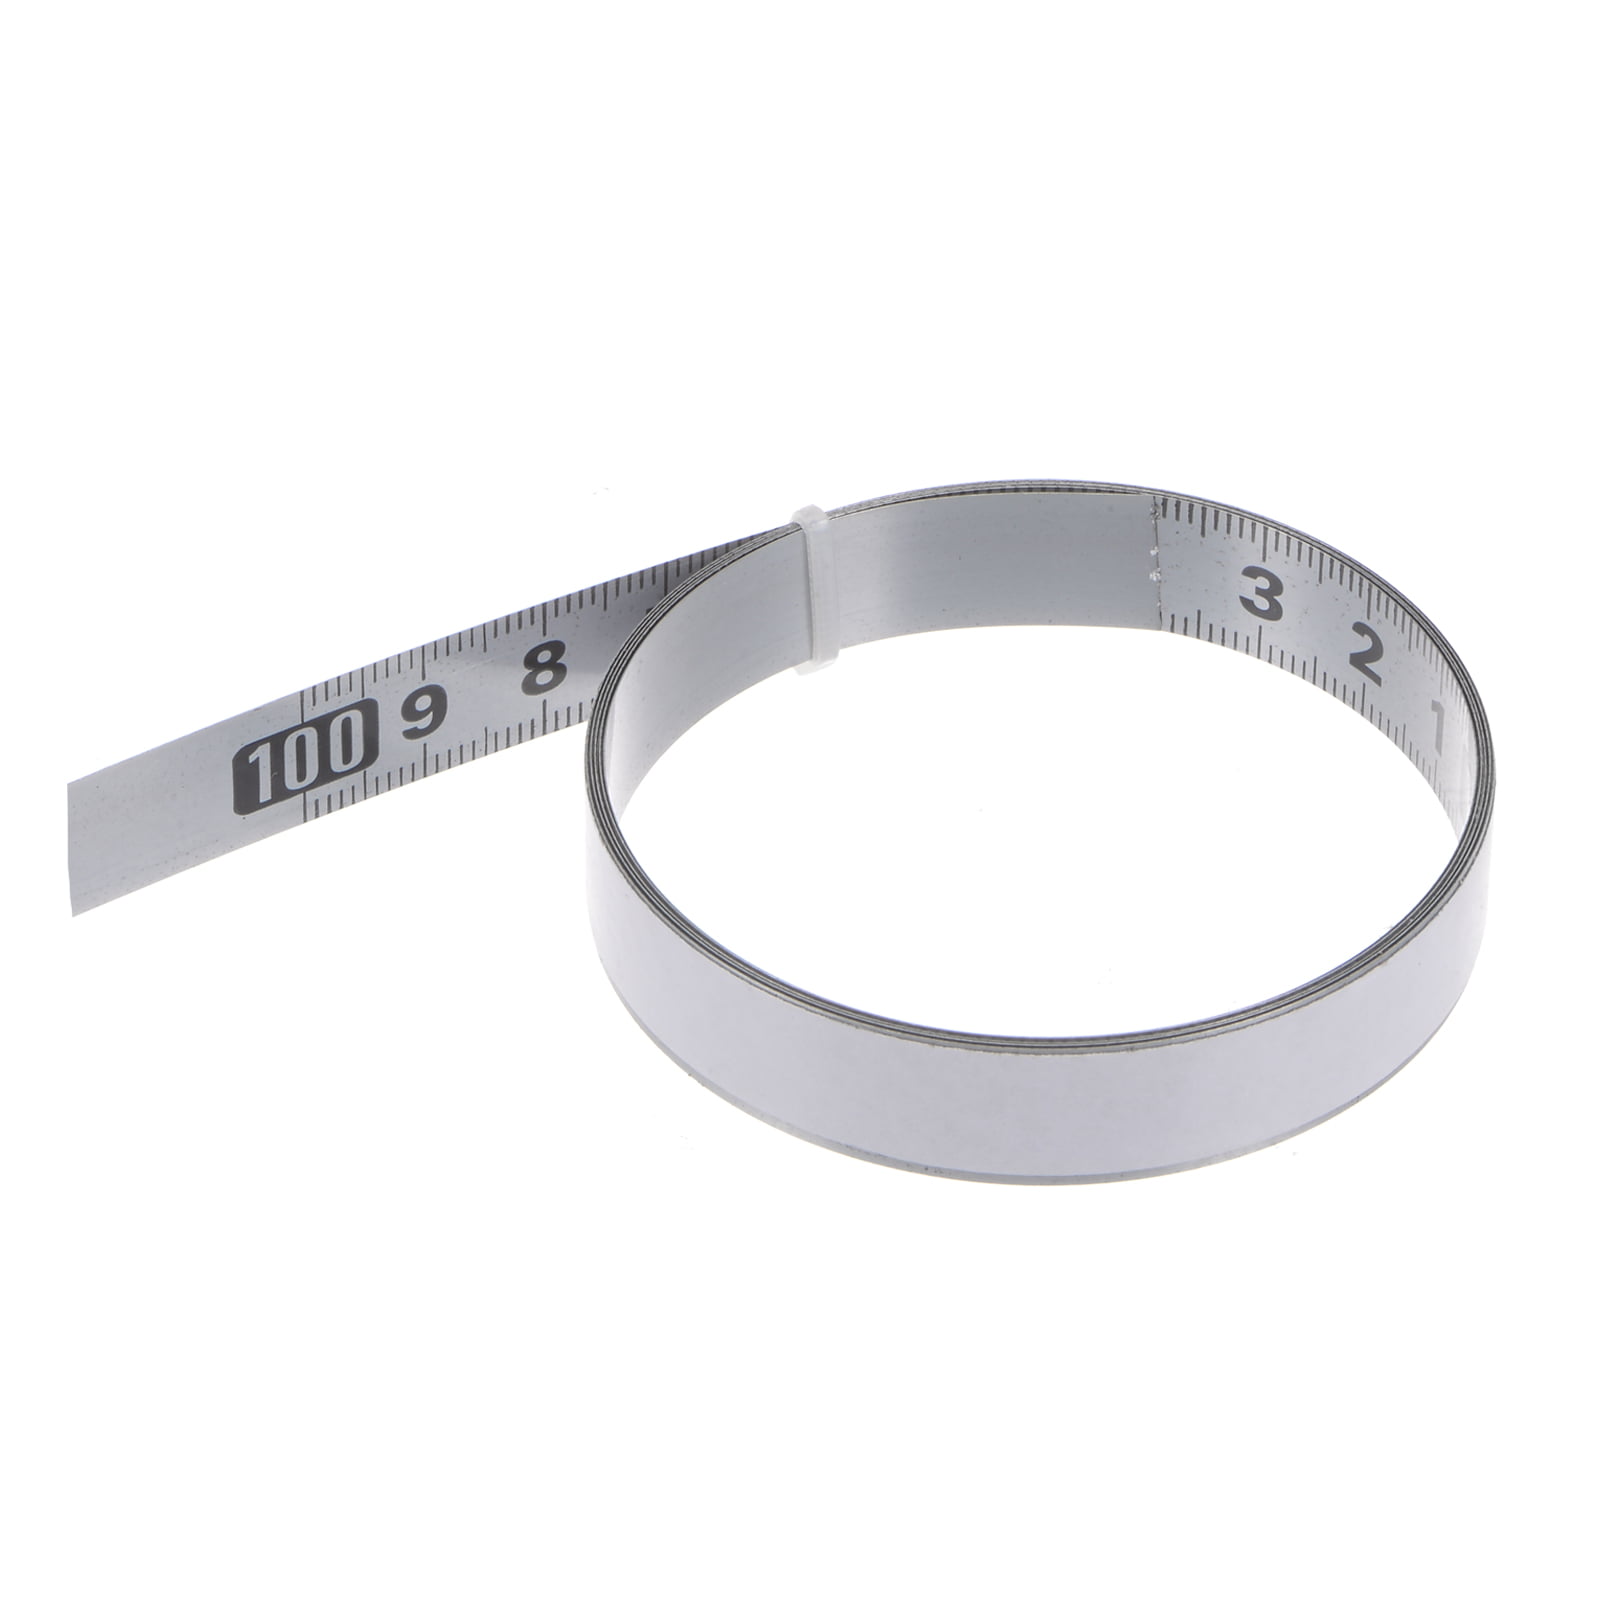 Self Adhesive Tape Measure 100cm Start from Middle Steel Ruler